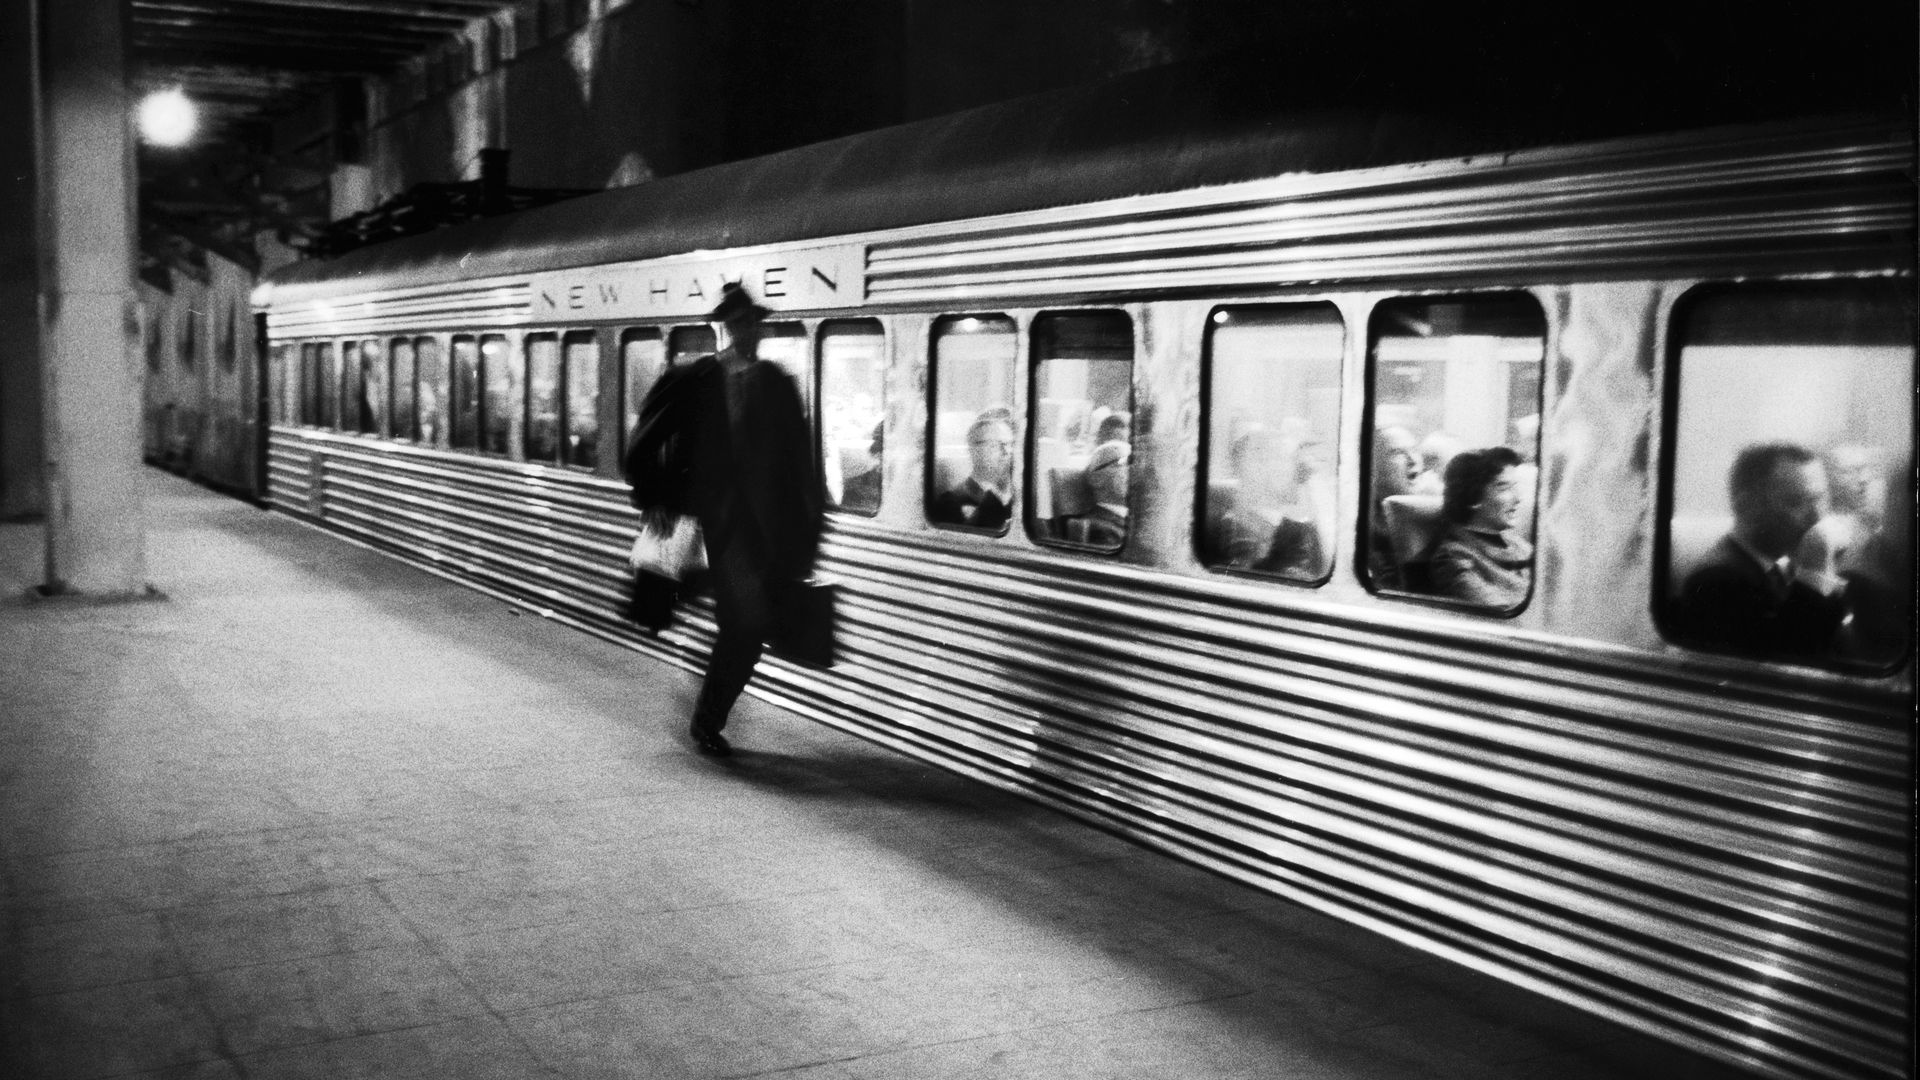 Silhouette of a man running against a silver train in a black and white photo